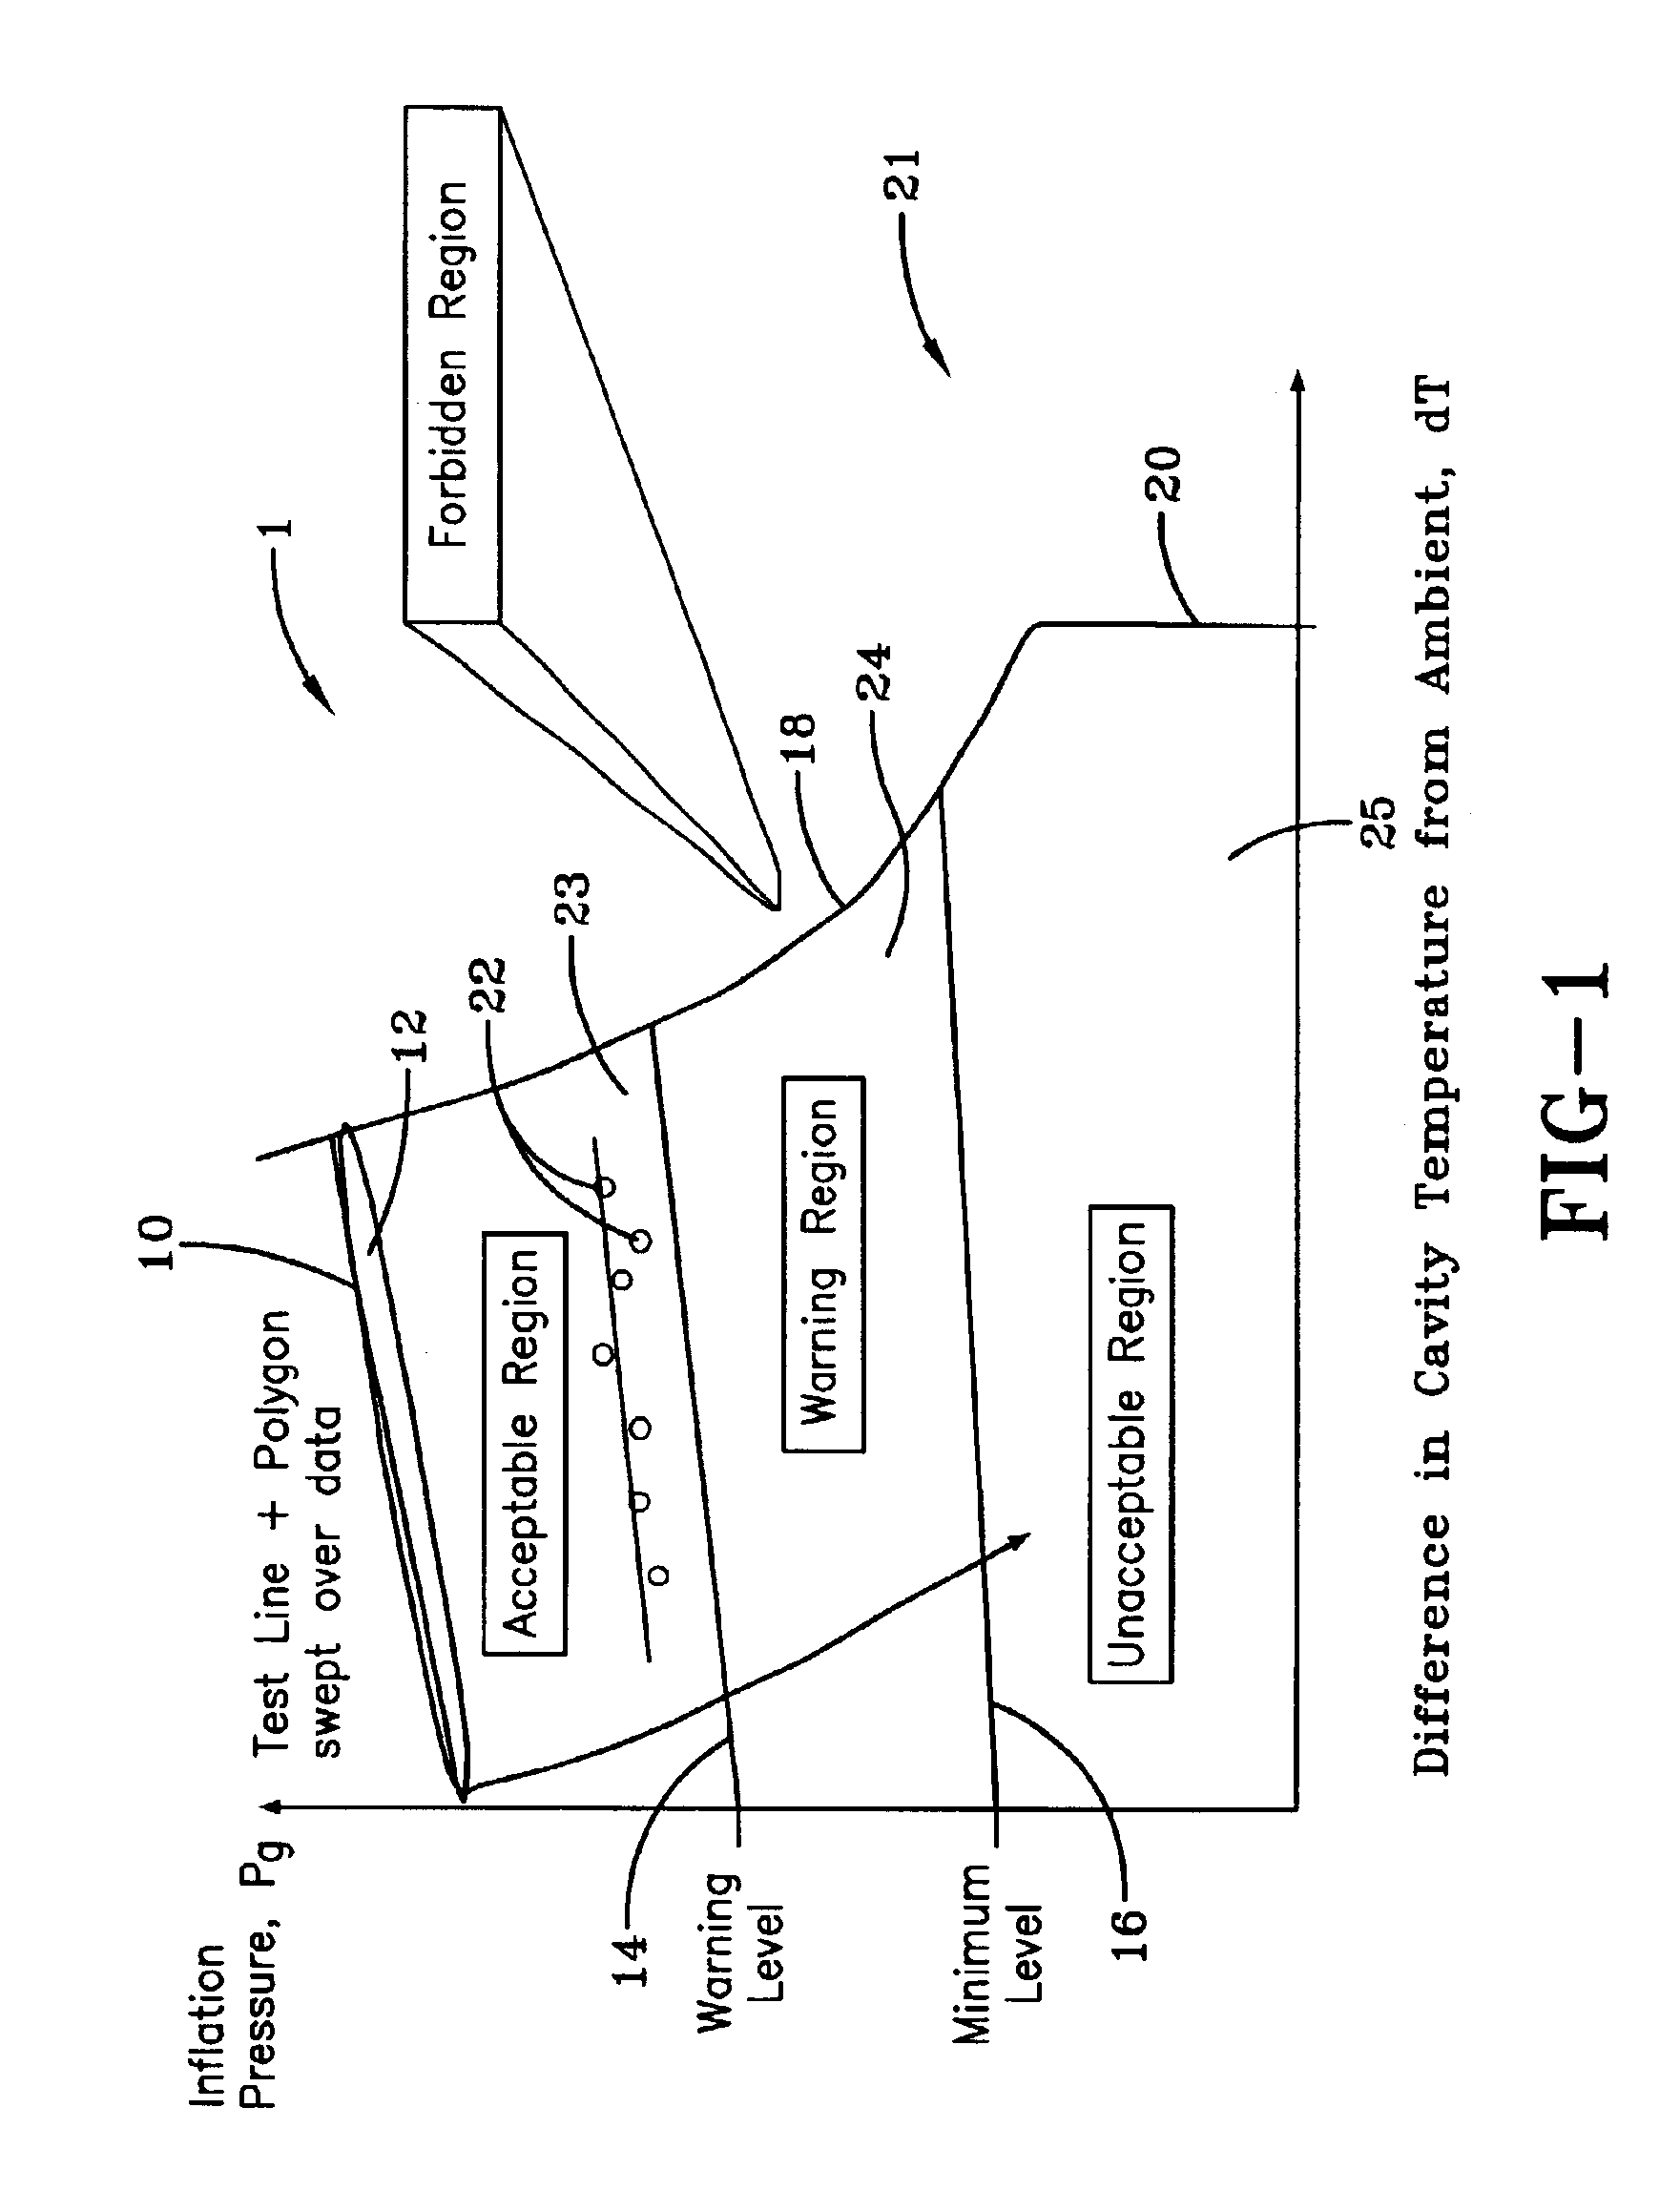 Method for processing information in a tire pressure monitoring system